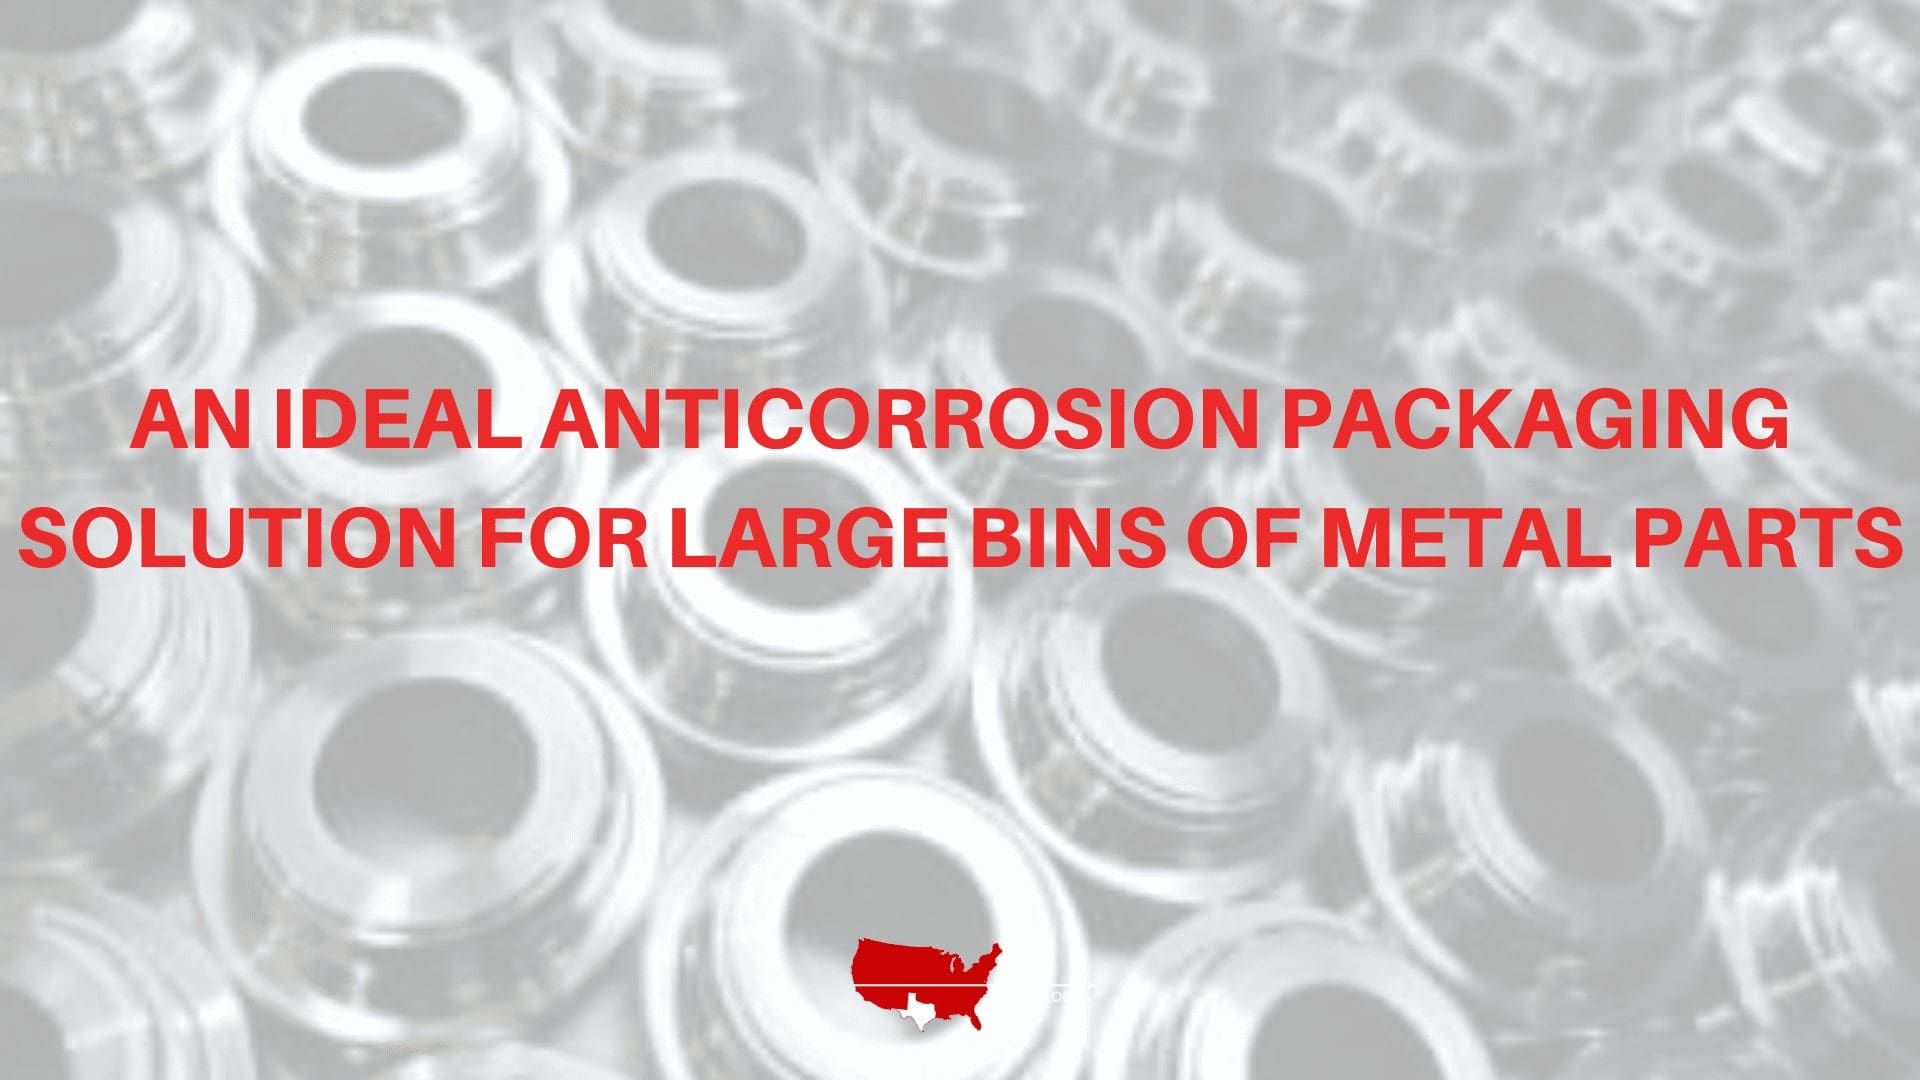 An Ideal Anticorrosion Packaging Solution for Large Bins of Metal Parts